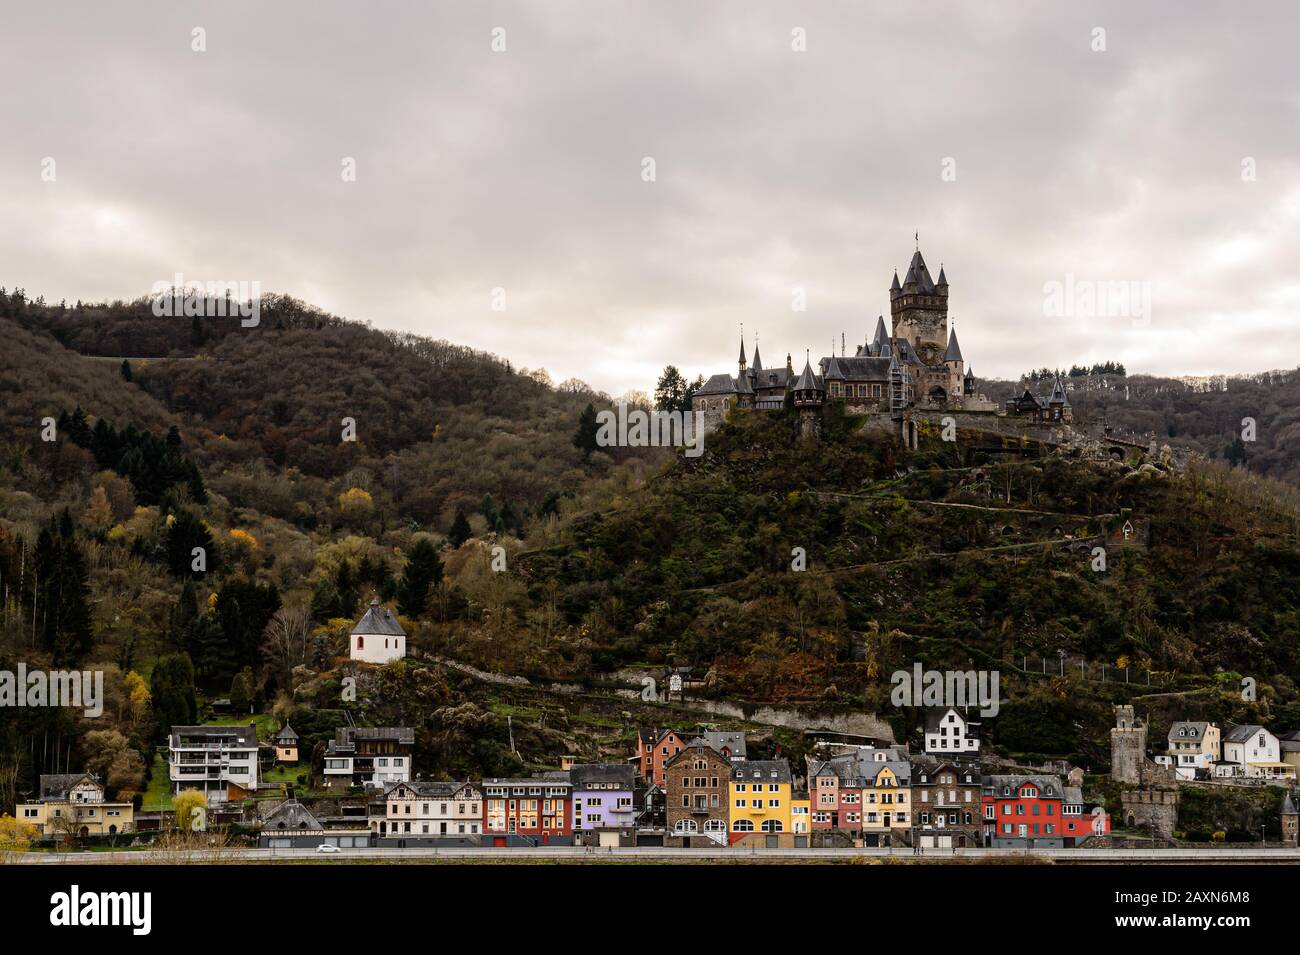 'Reichsburg' castle in autumn at dusk, Cochem, Germany Stock Photo